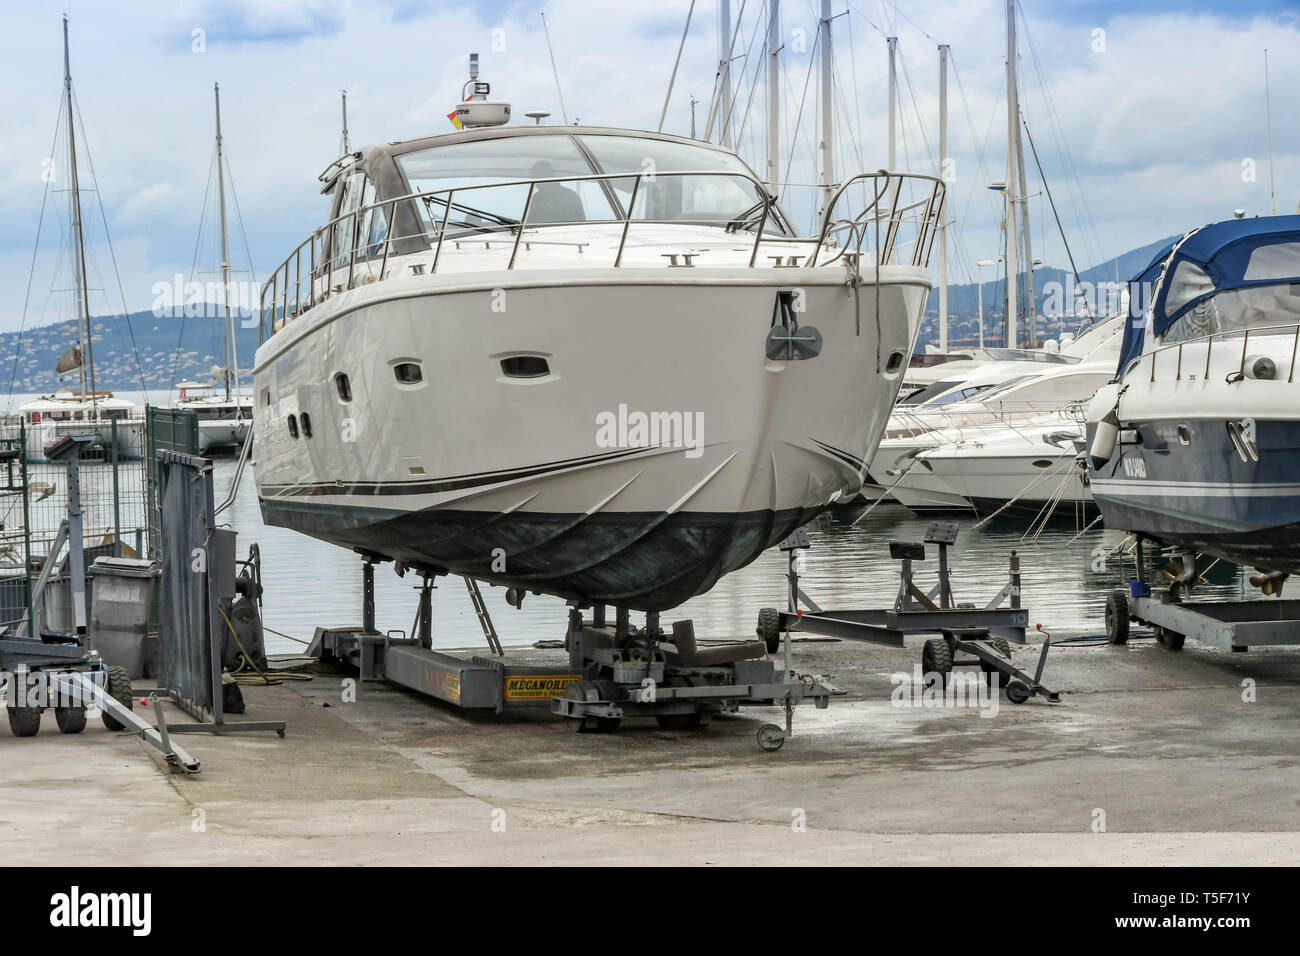 SAN RAPHAEL, FRANCE - APRIL 2019: Luxury motor cruiser out of water on a trolley in a boatyard in San Raphael Stock Photo